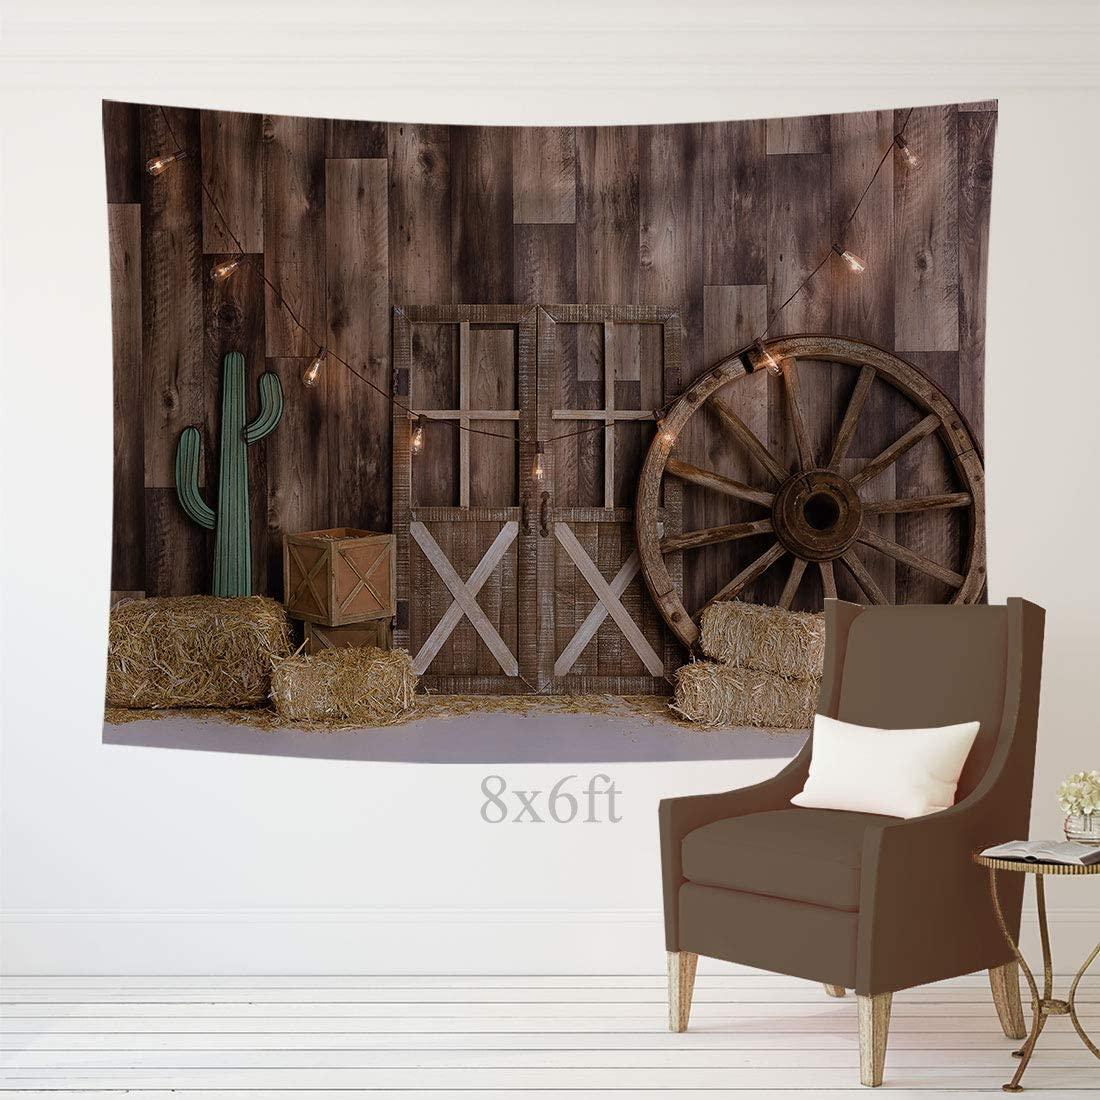 7x5ft Cowboy Backdrop for Photography Vintage Wild West Wooden House Barn Door Kids Baby Shower Birthday - Decotree.co Online Shop